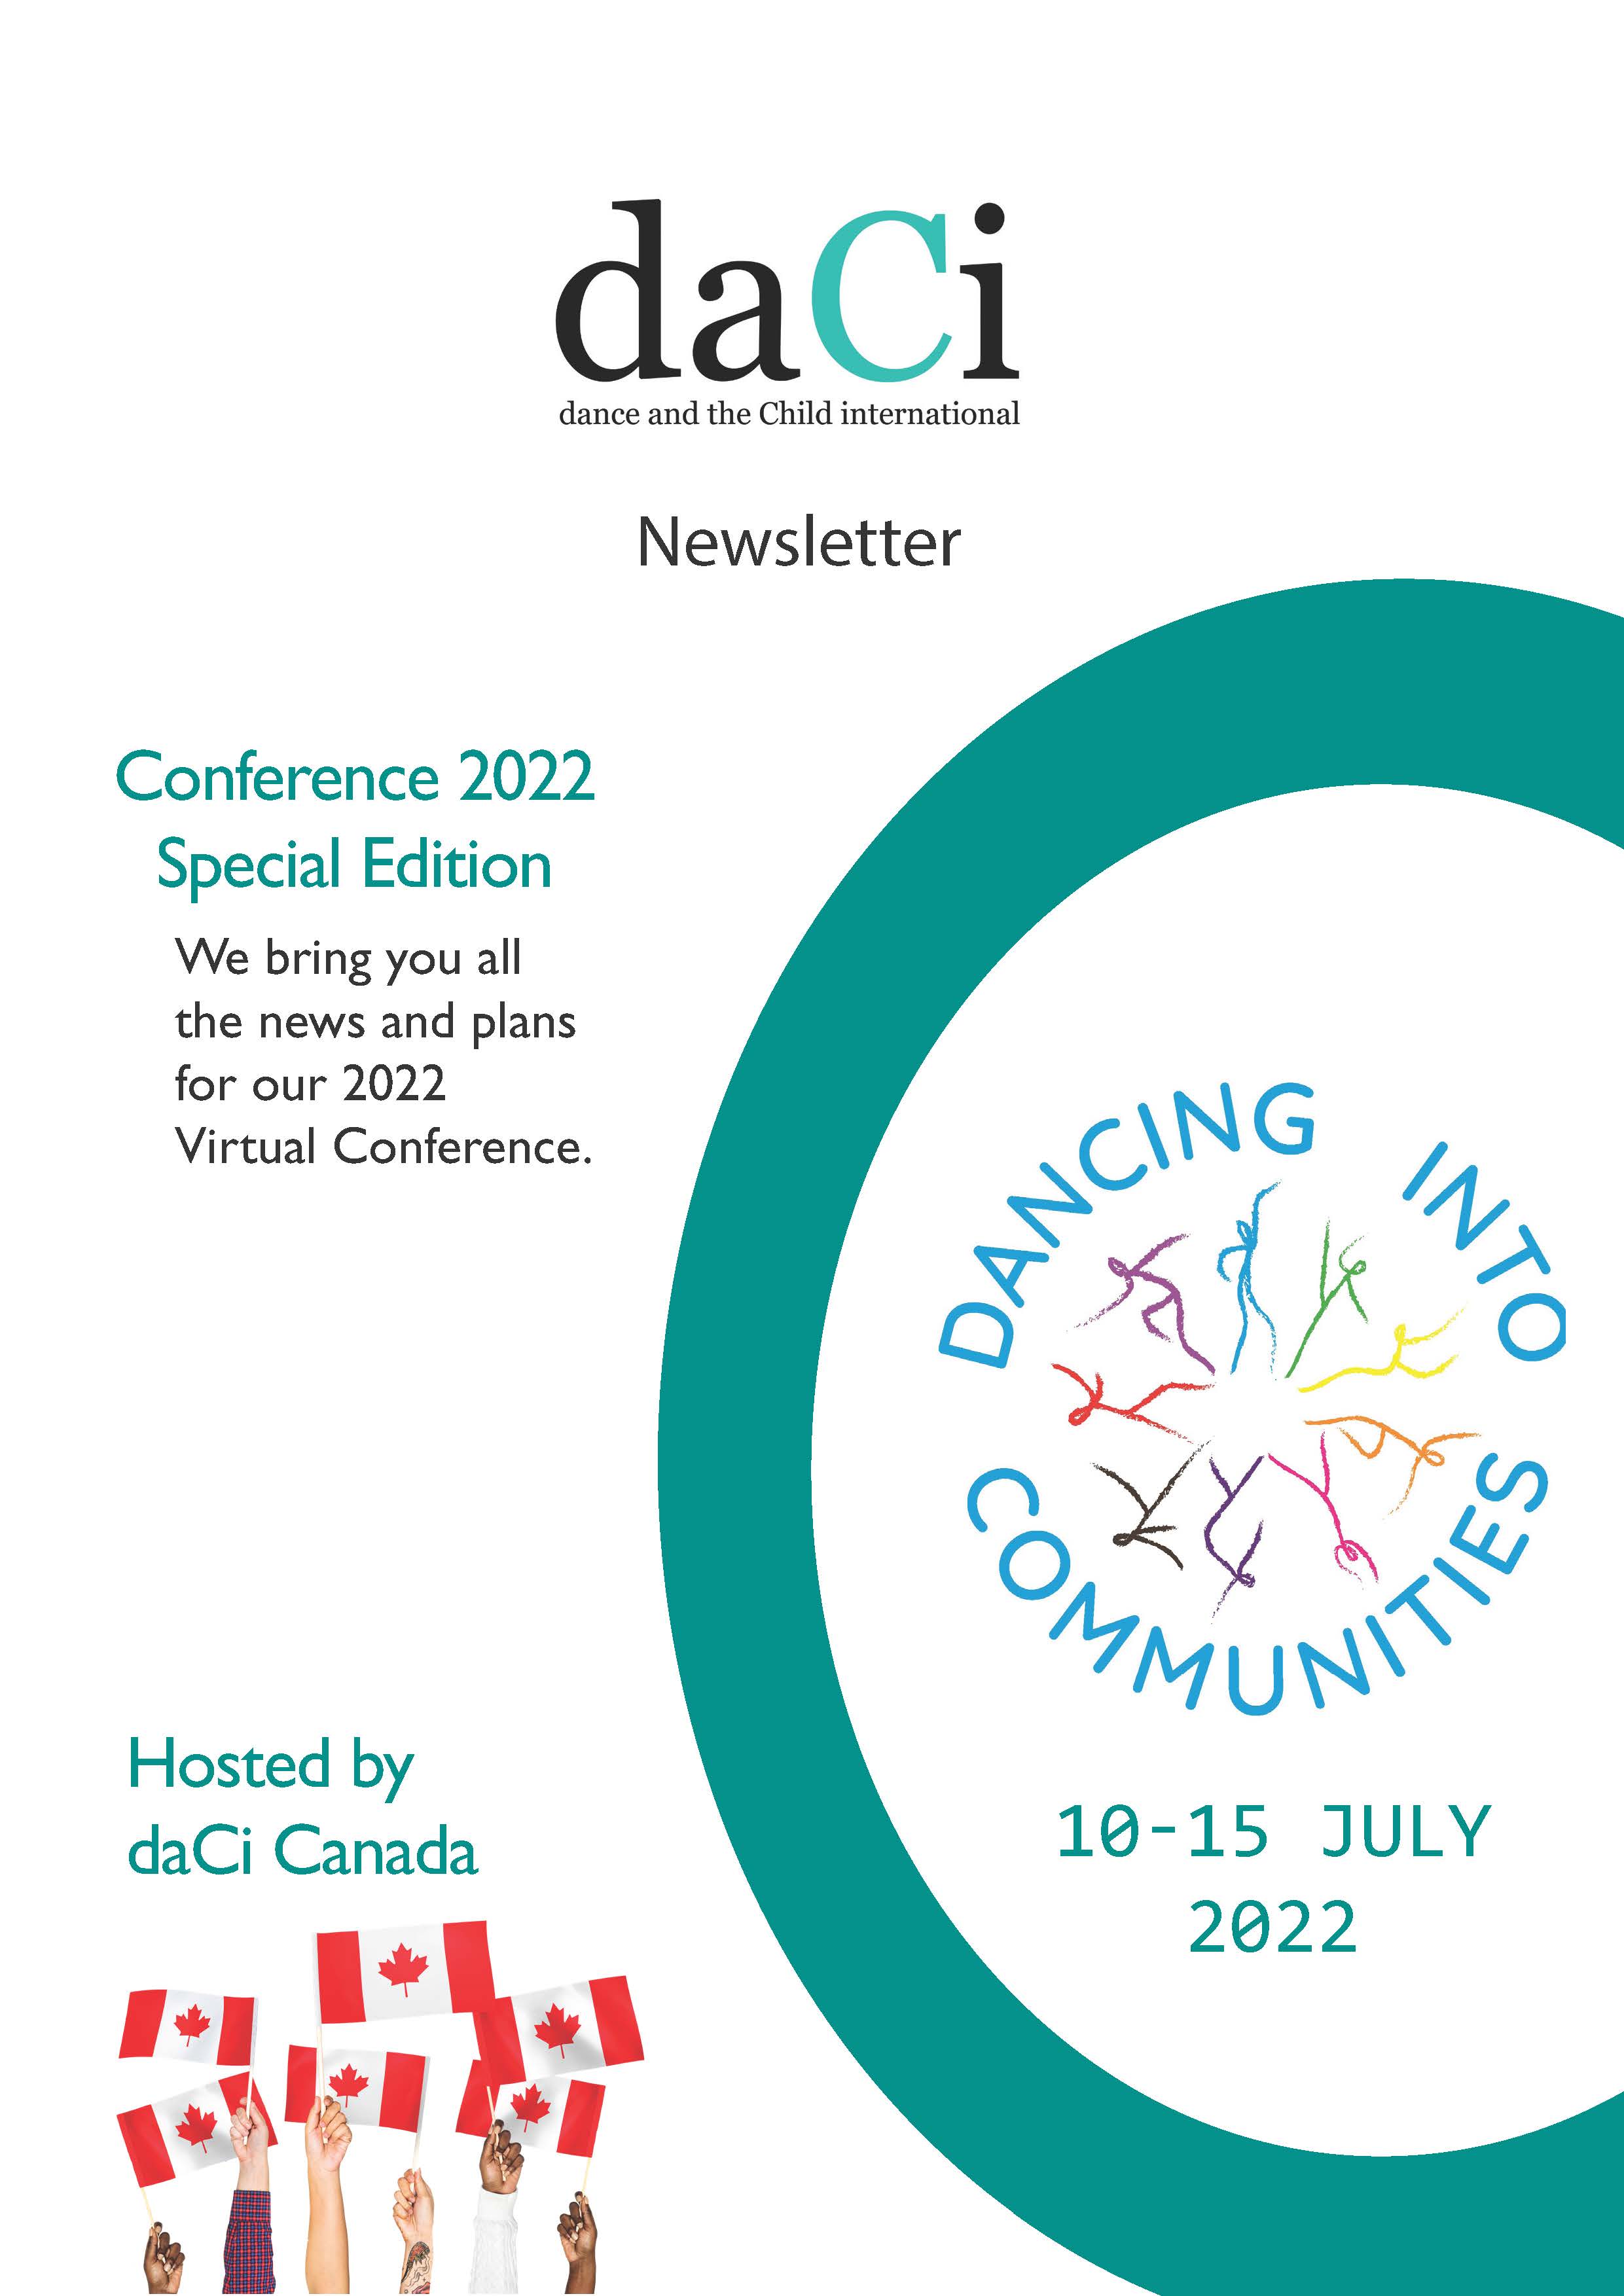 daCi newsletter Jan 2022 Conference 2022 Special Edition Page 01